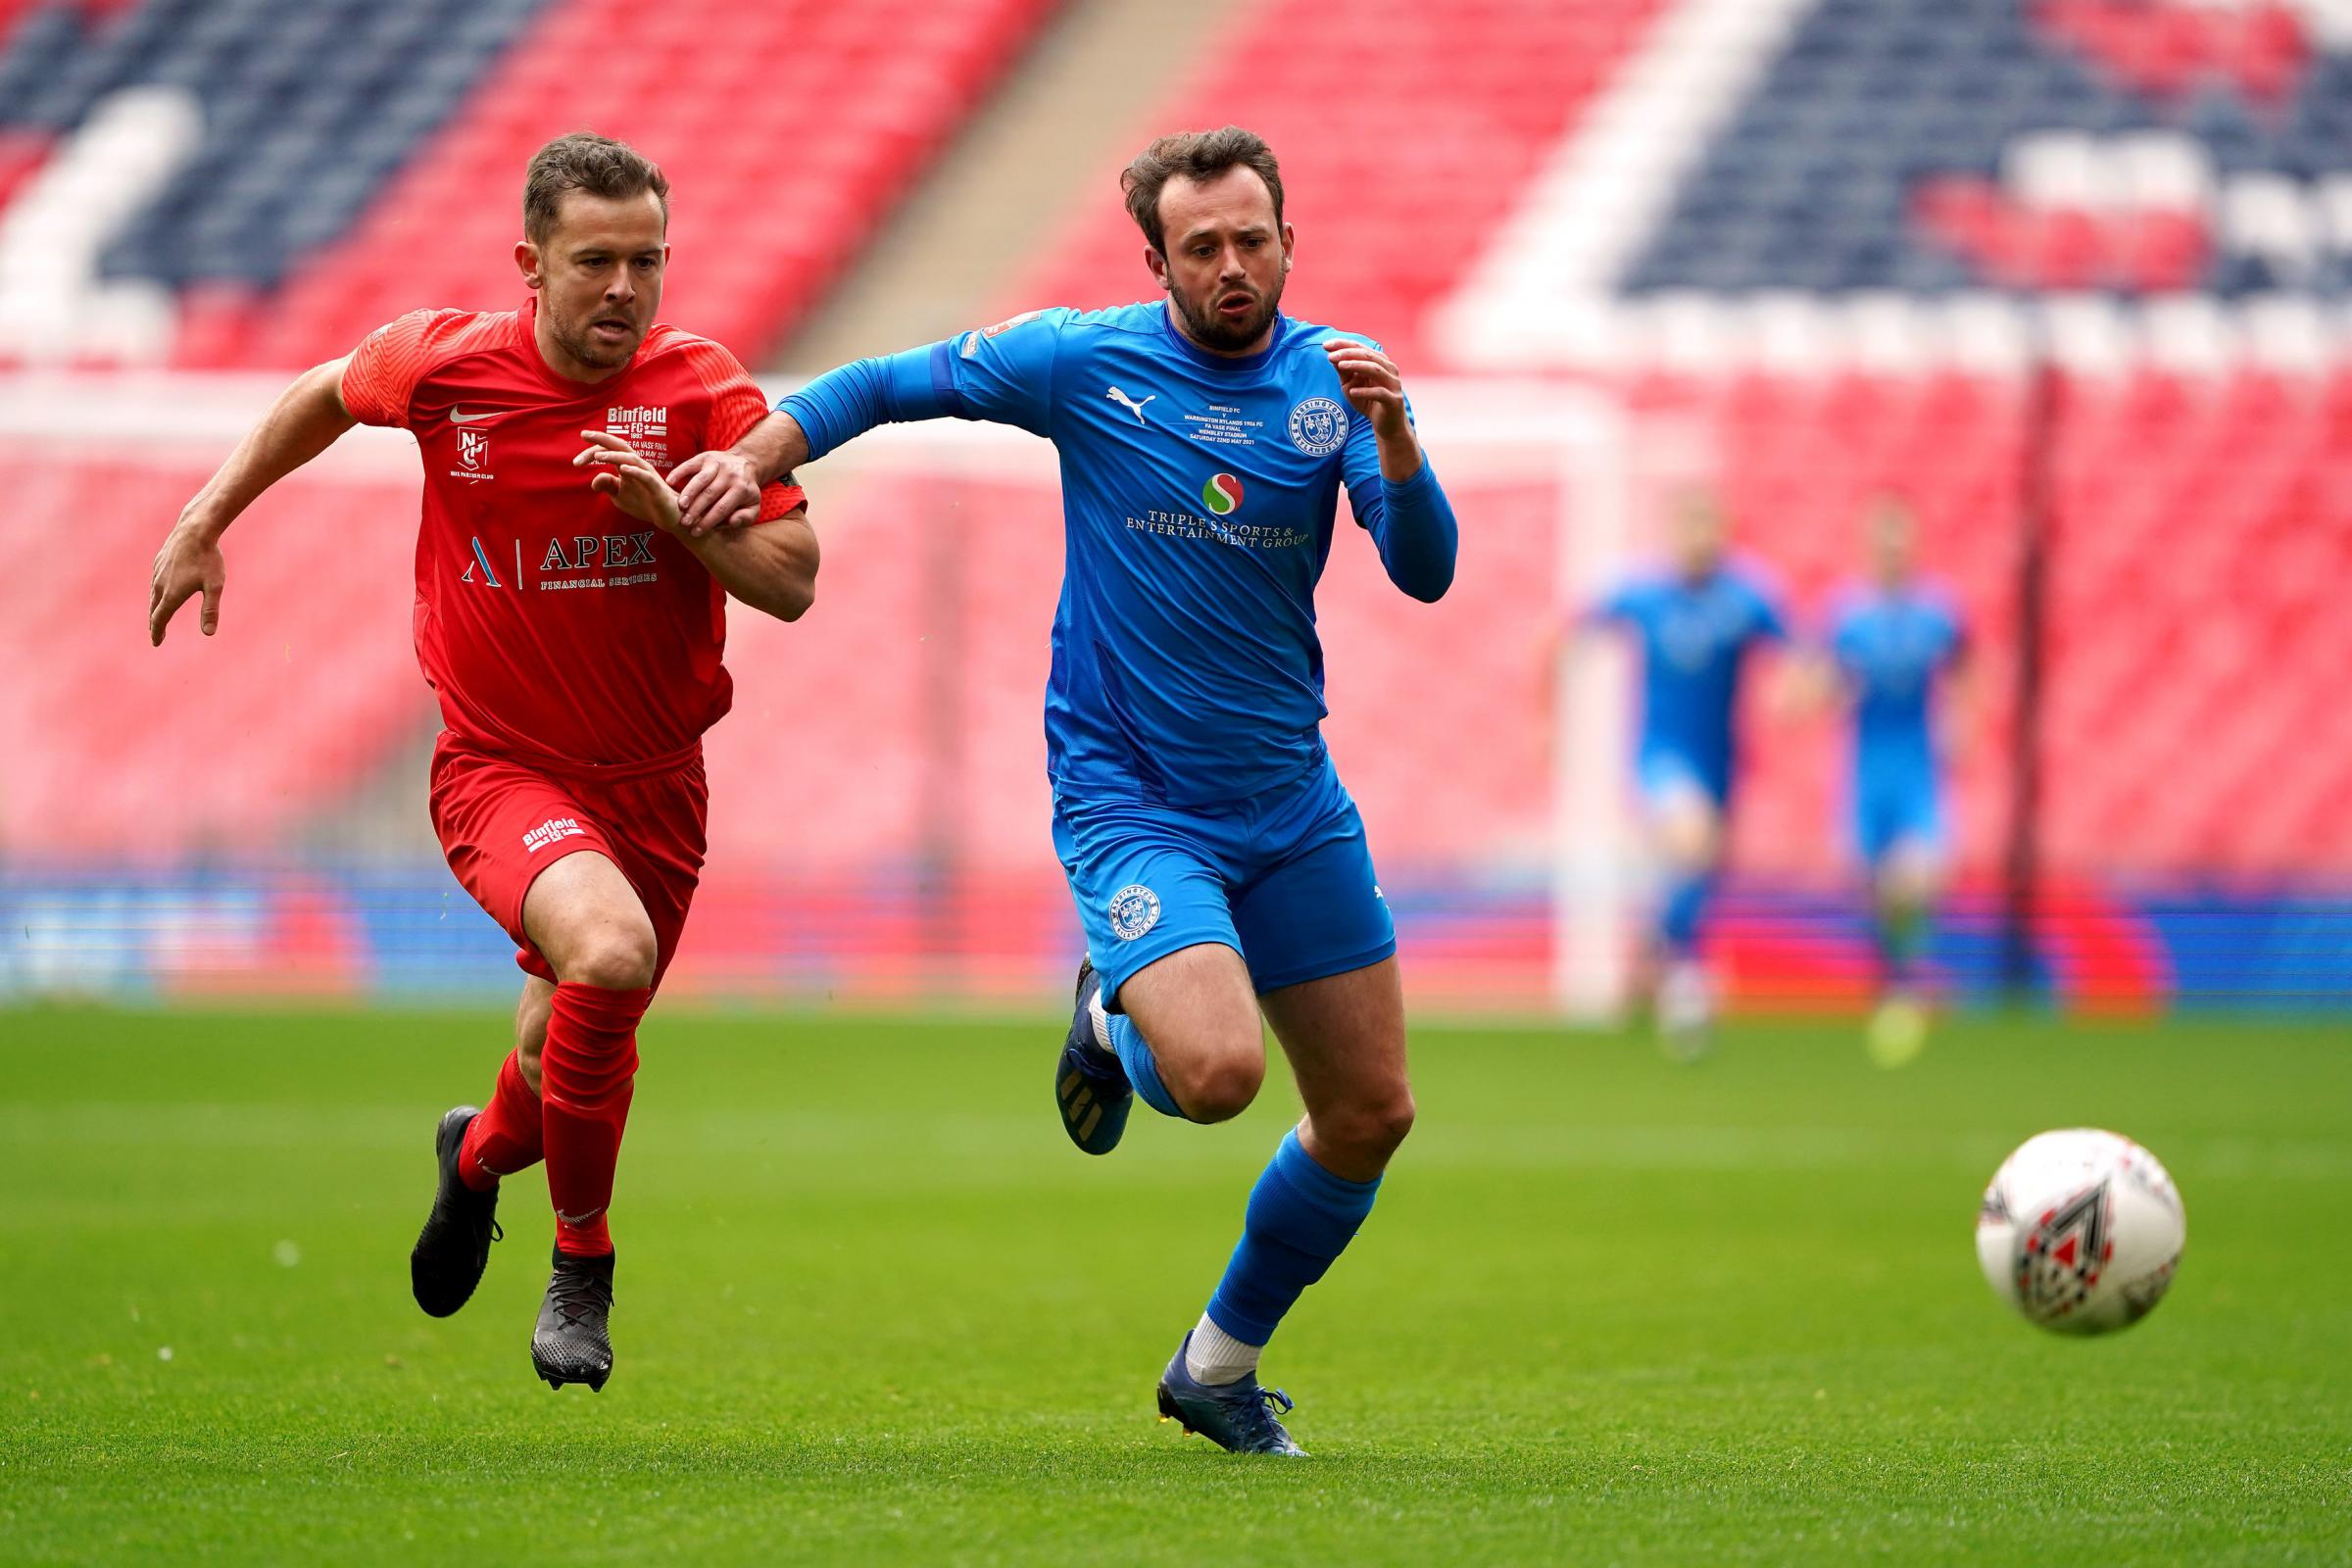 Ste Milne in action at Wembley. Picture by PA WIre